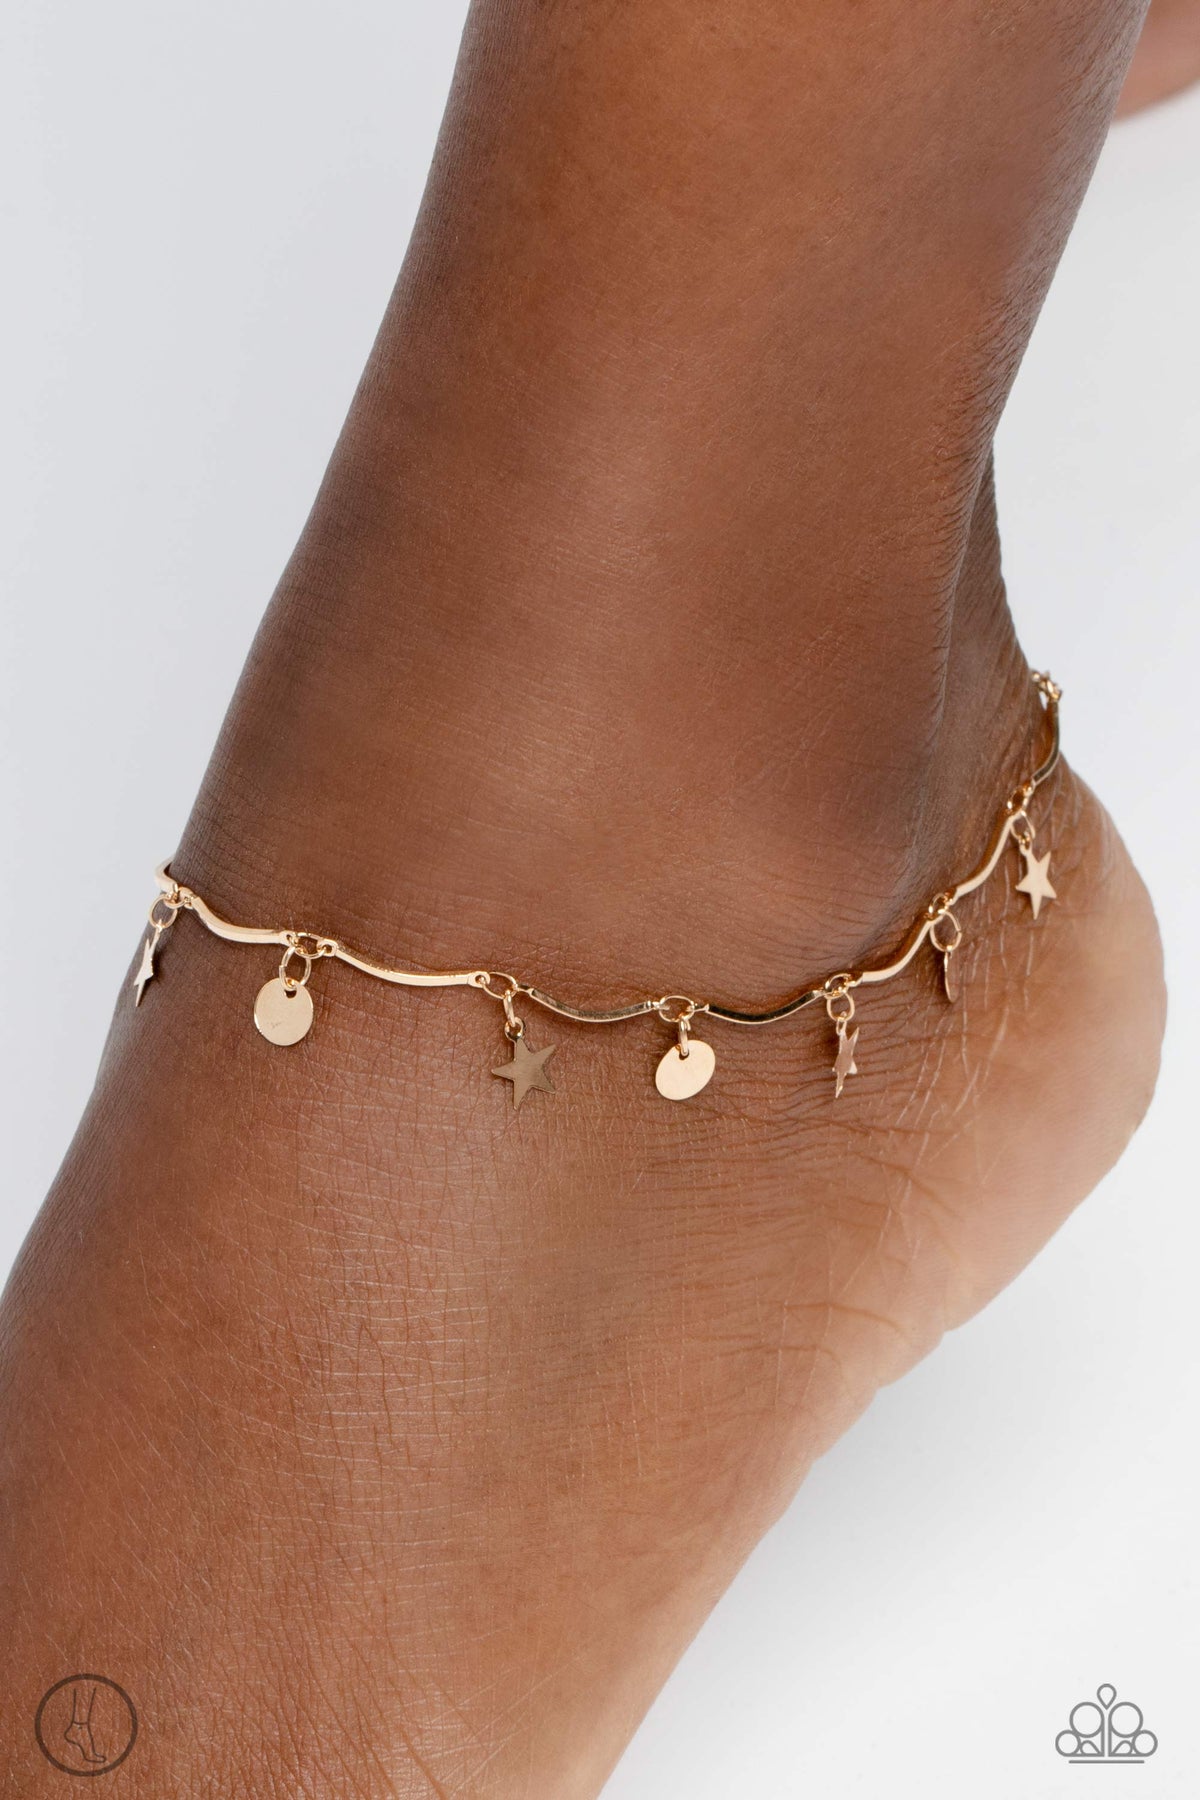 BEACH You To It Gold Anklet - Paparazzi Accessories-on model - CarasShop.com - $5 Jewelry by Cara Jewels